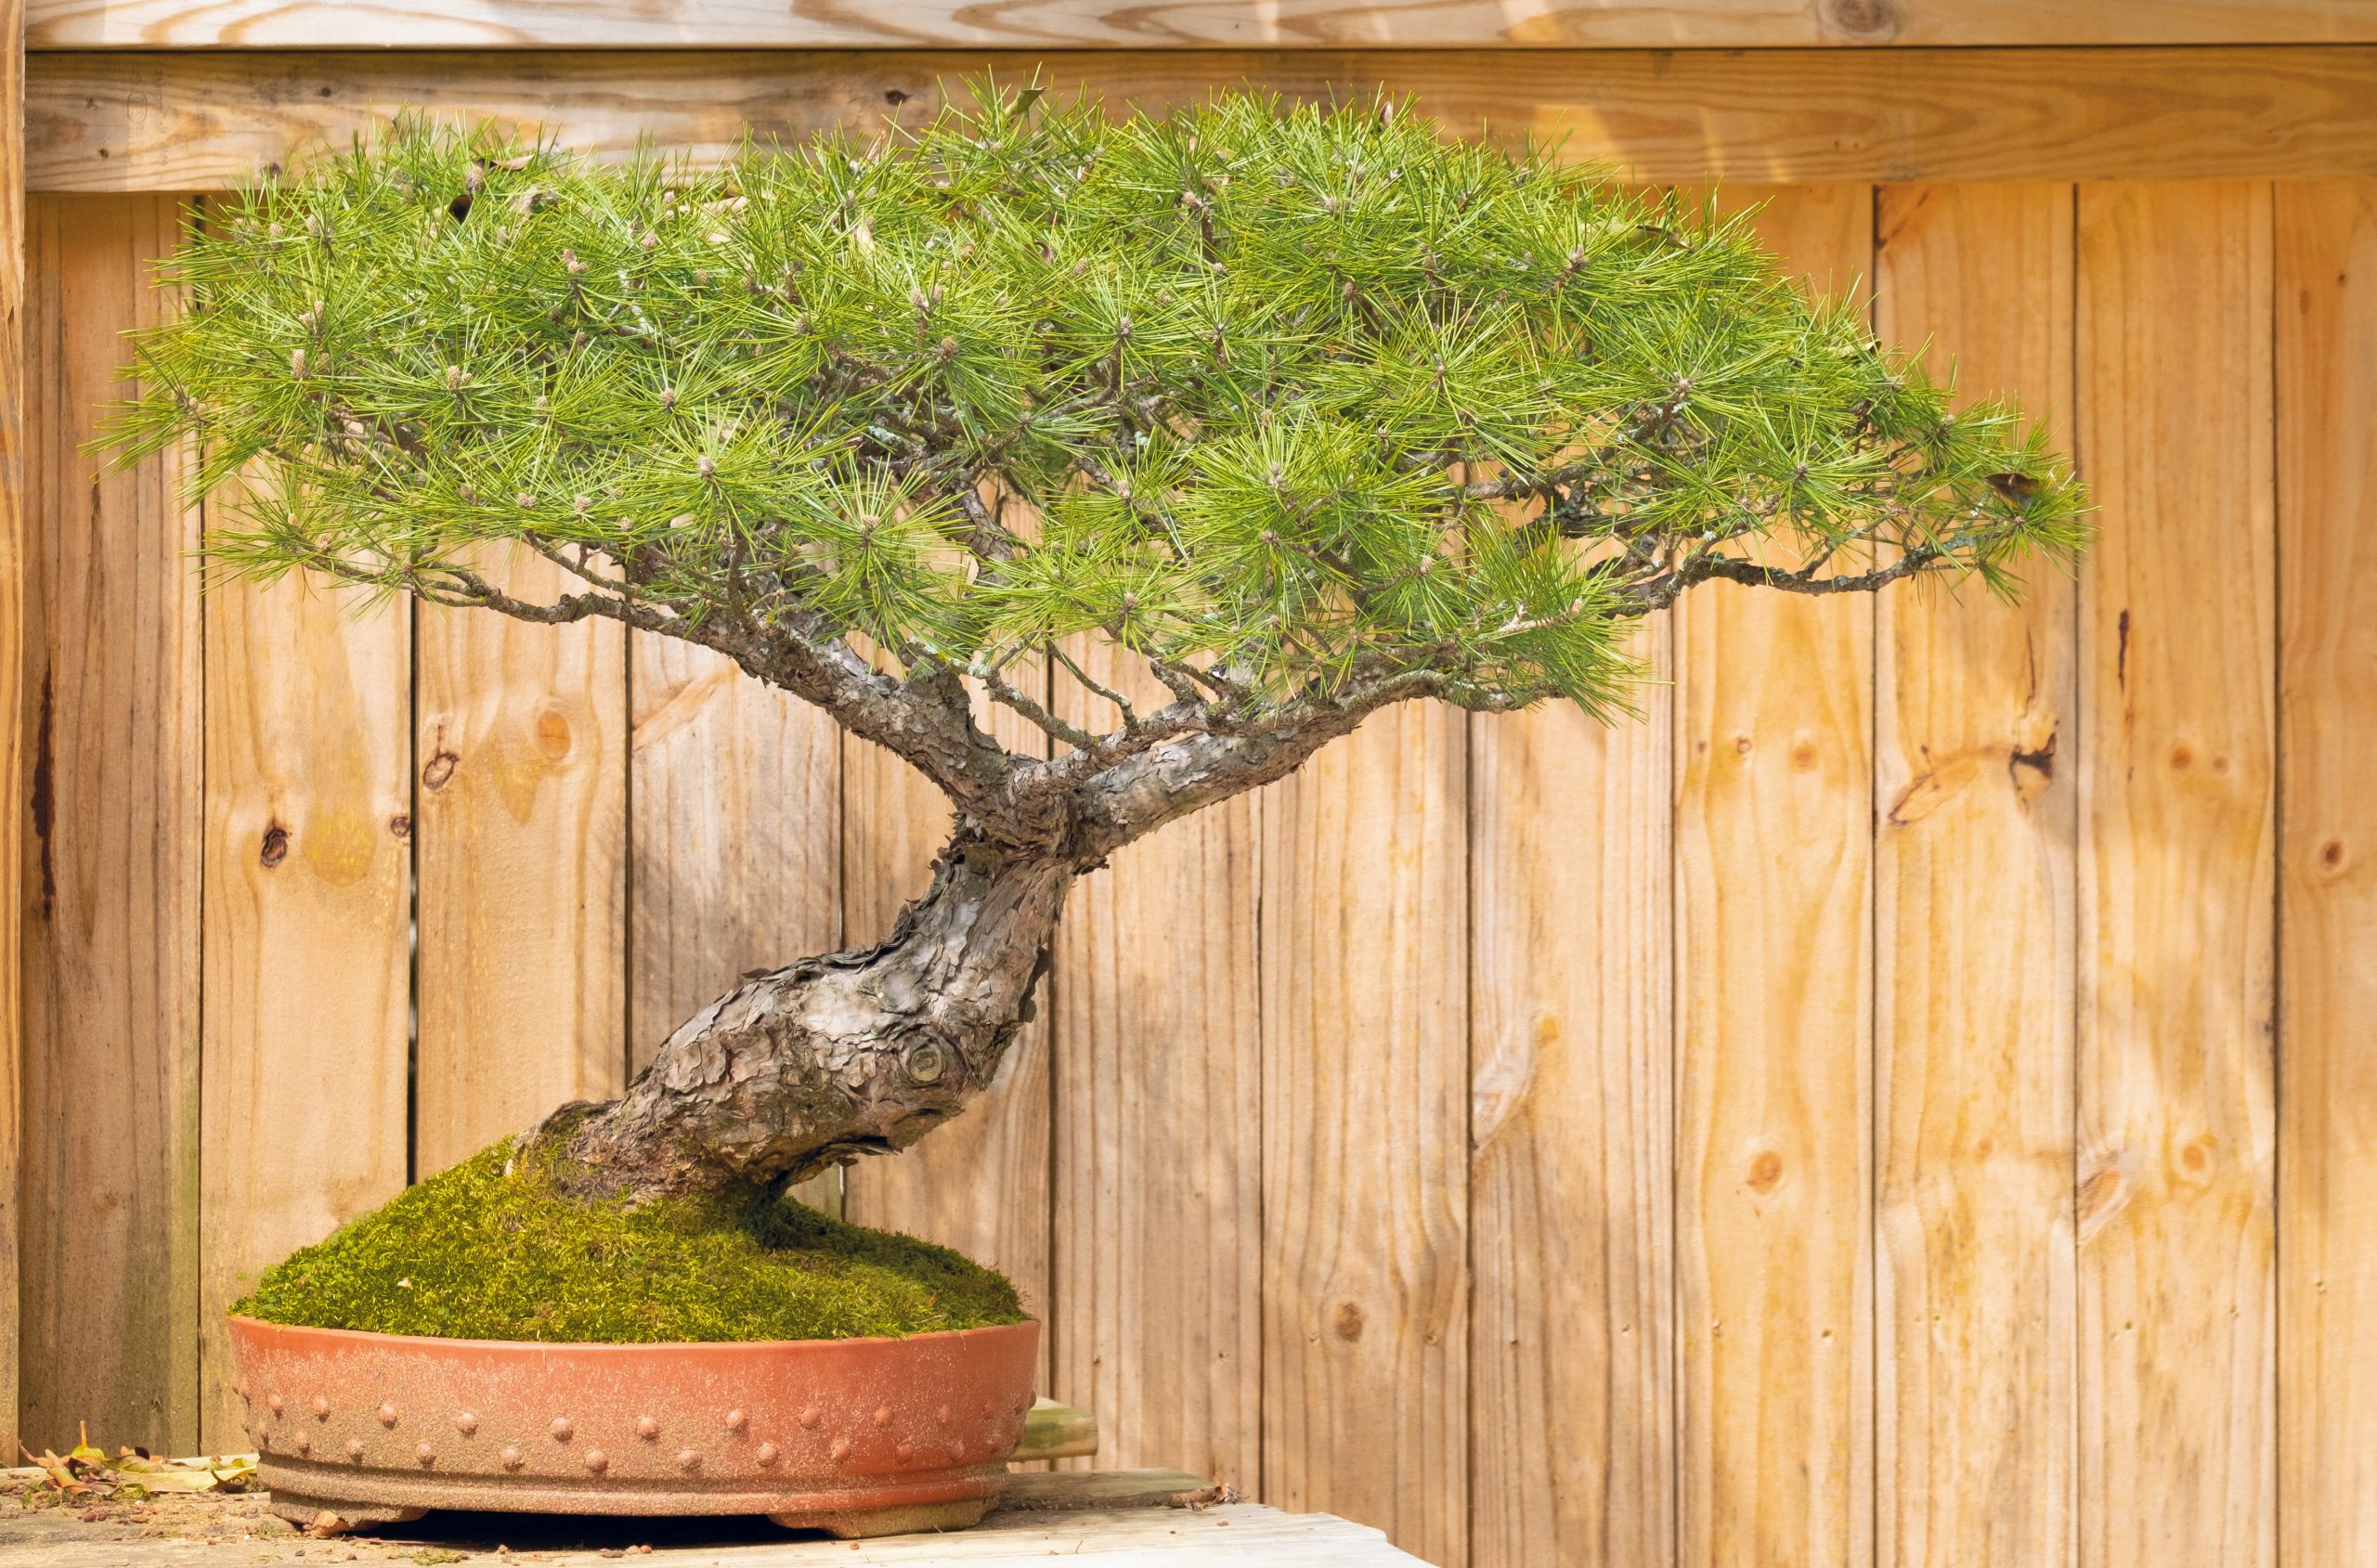 This Japanese red pine, Yamadori, has been in training since 1984.